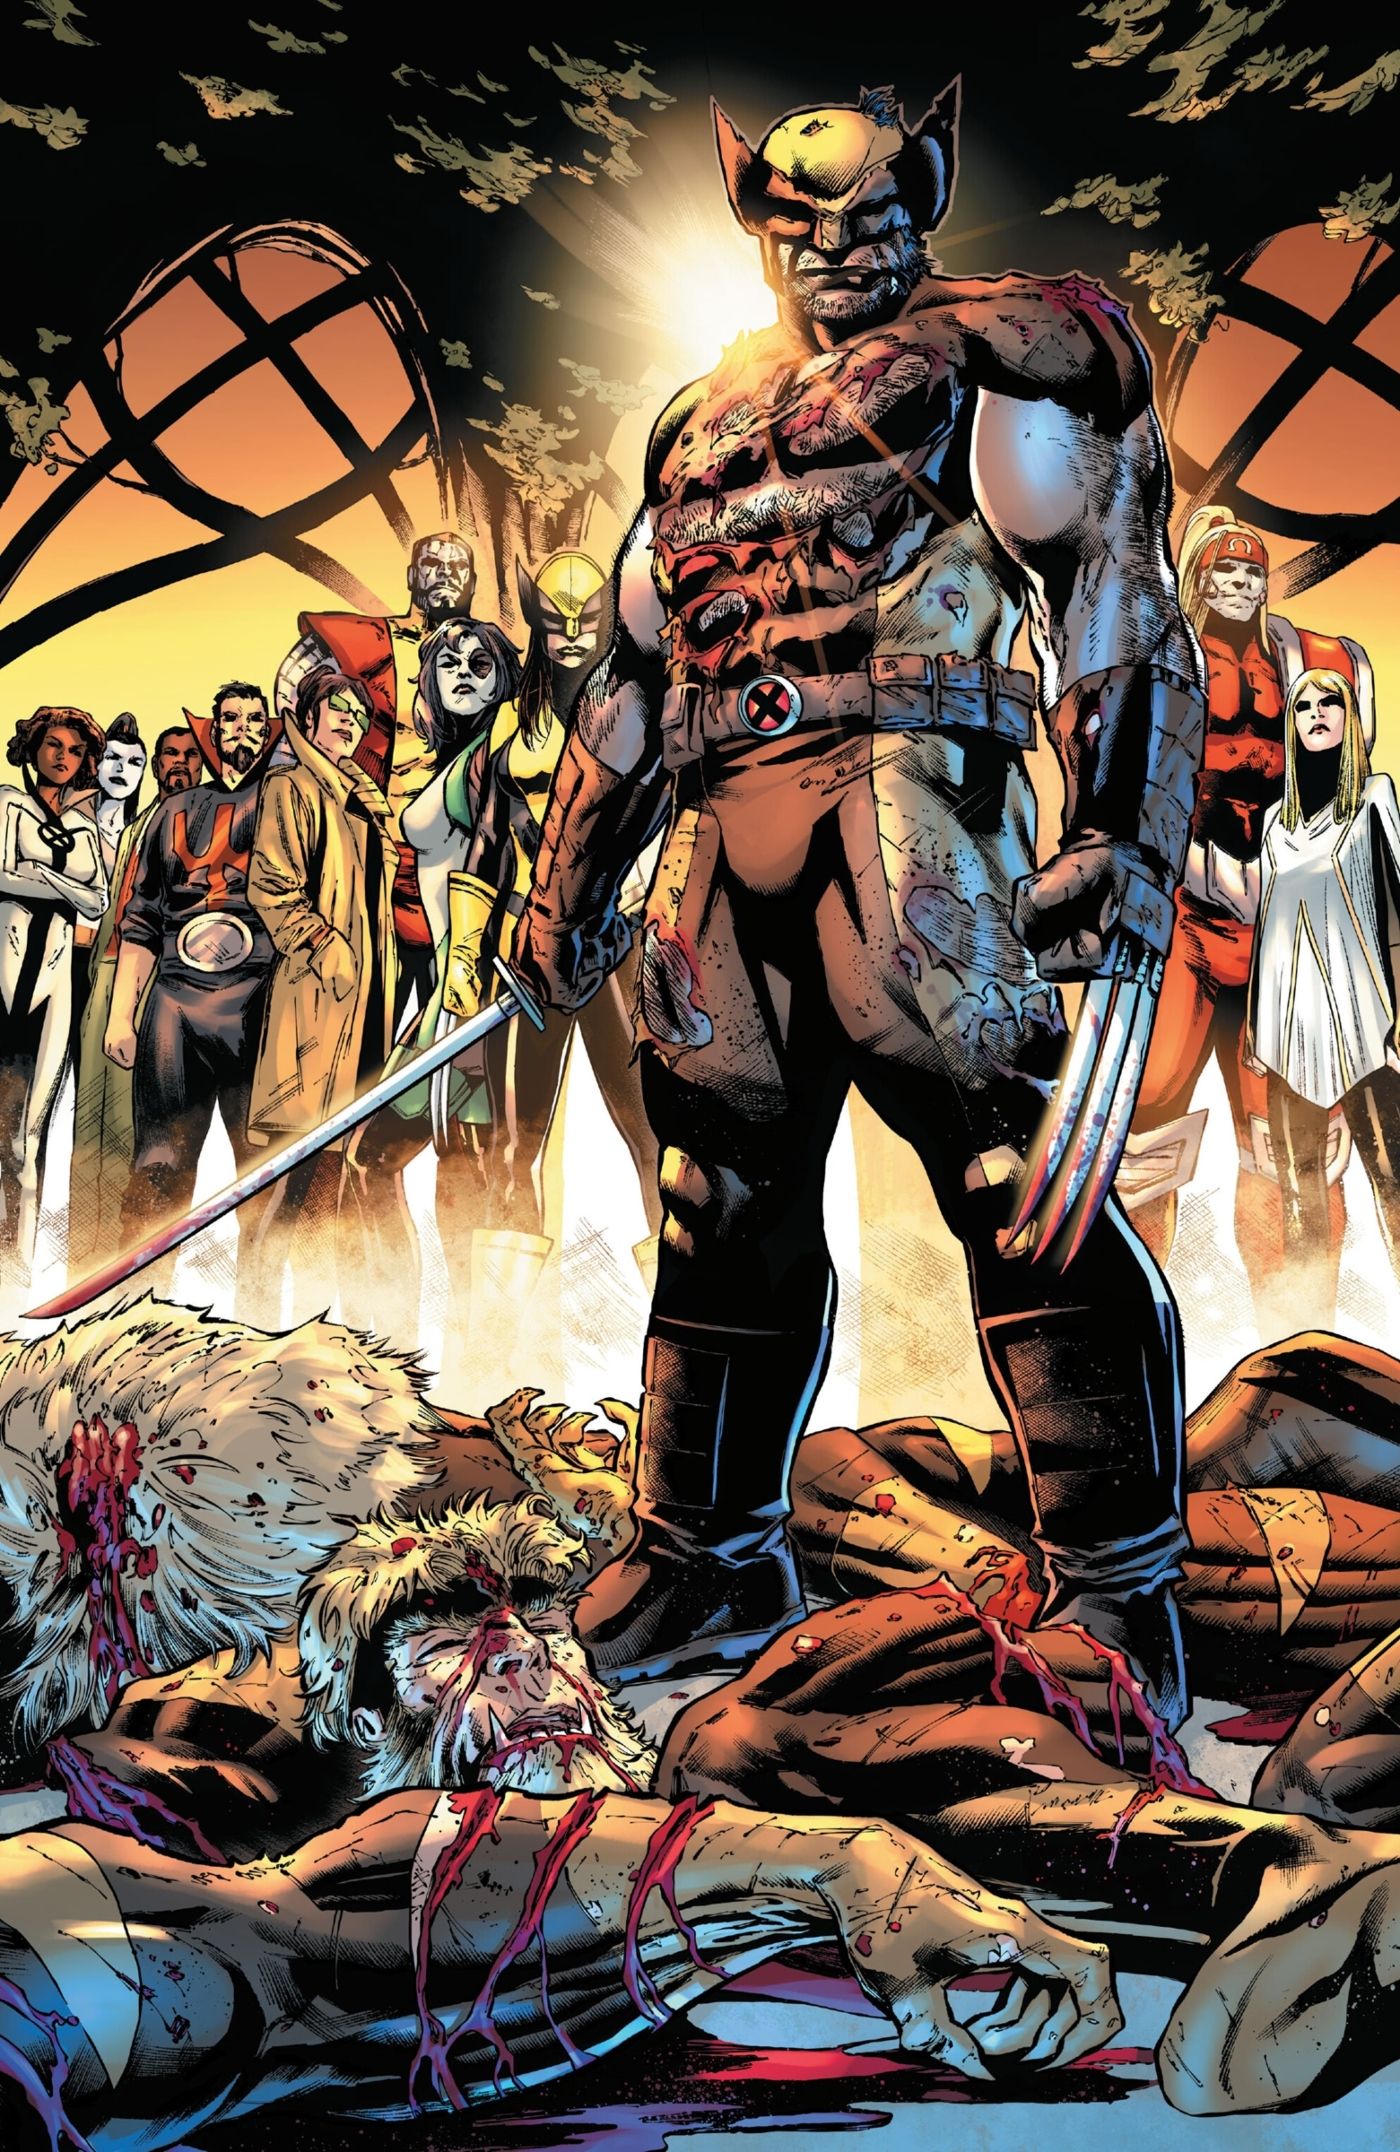 Wolverine standing over Sabretooth's mutilated corpse.